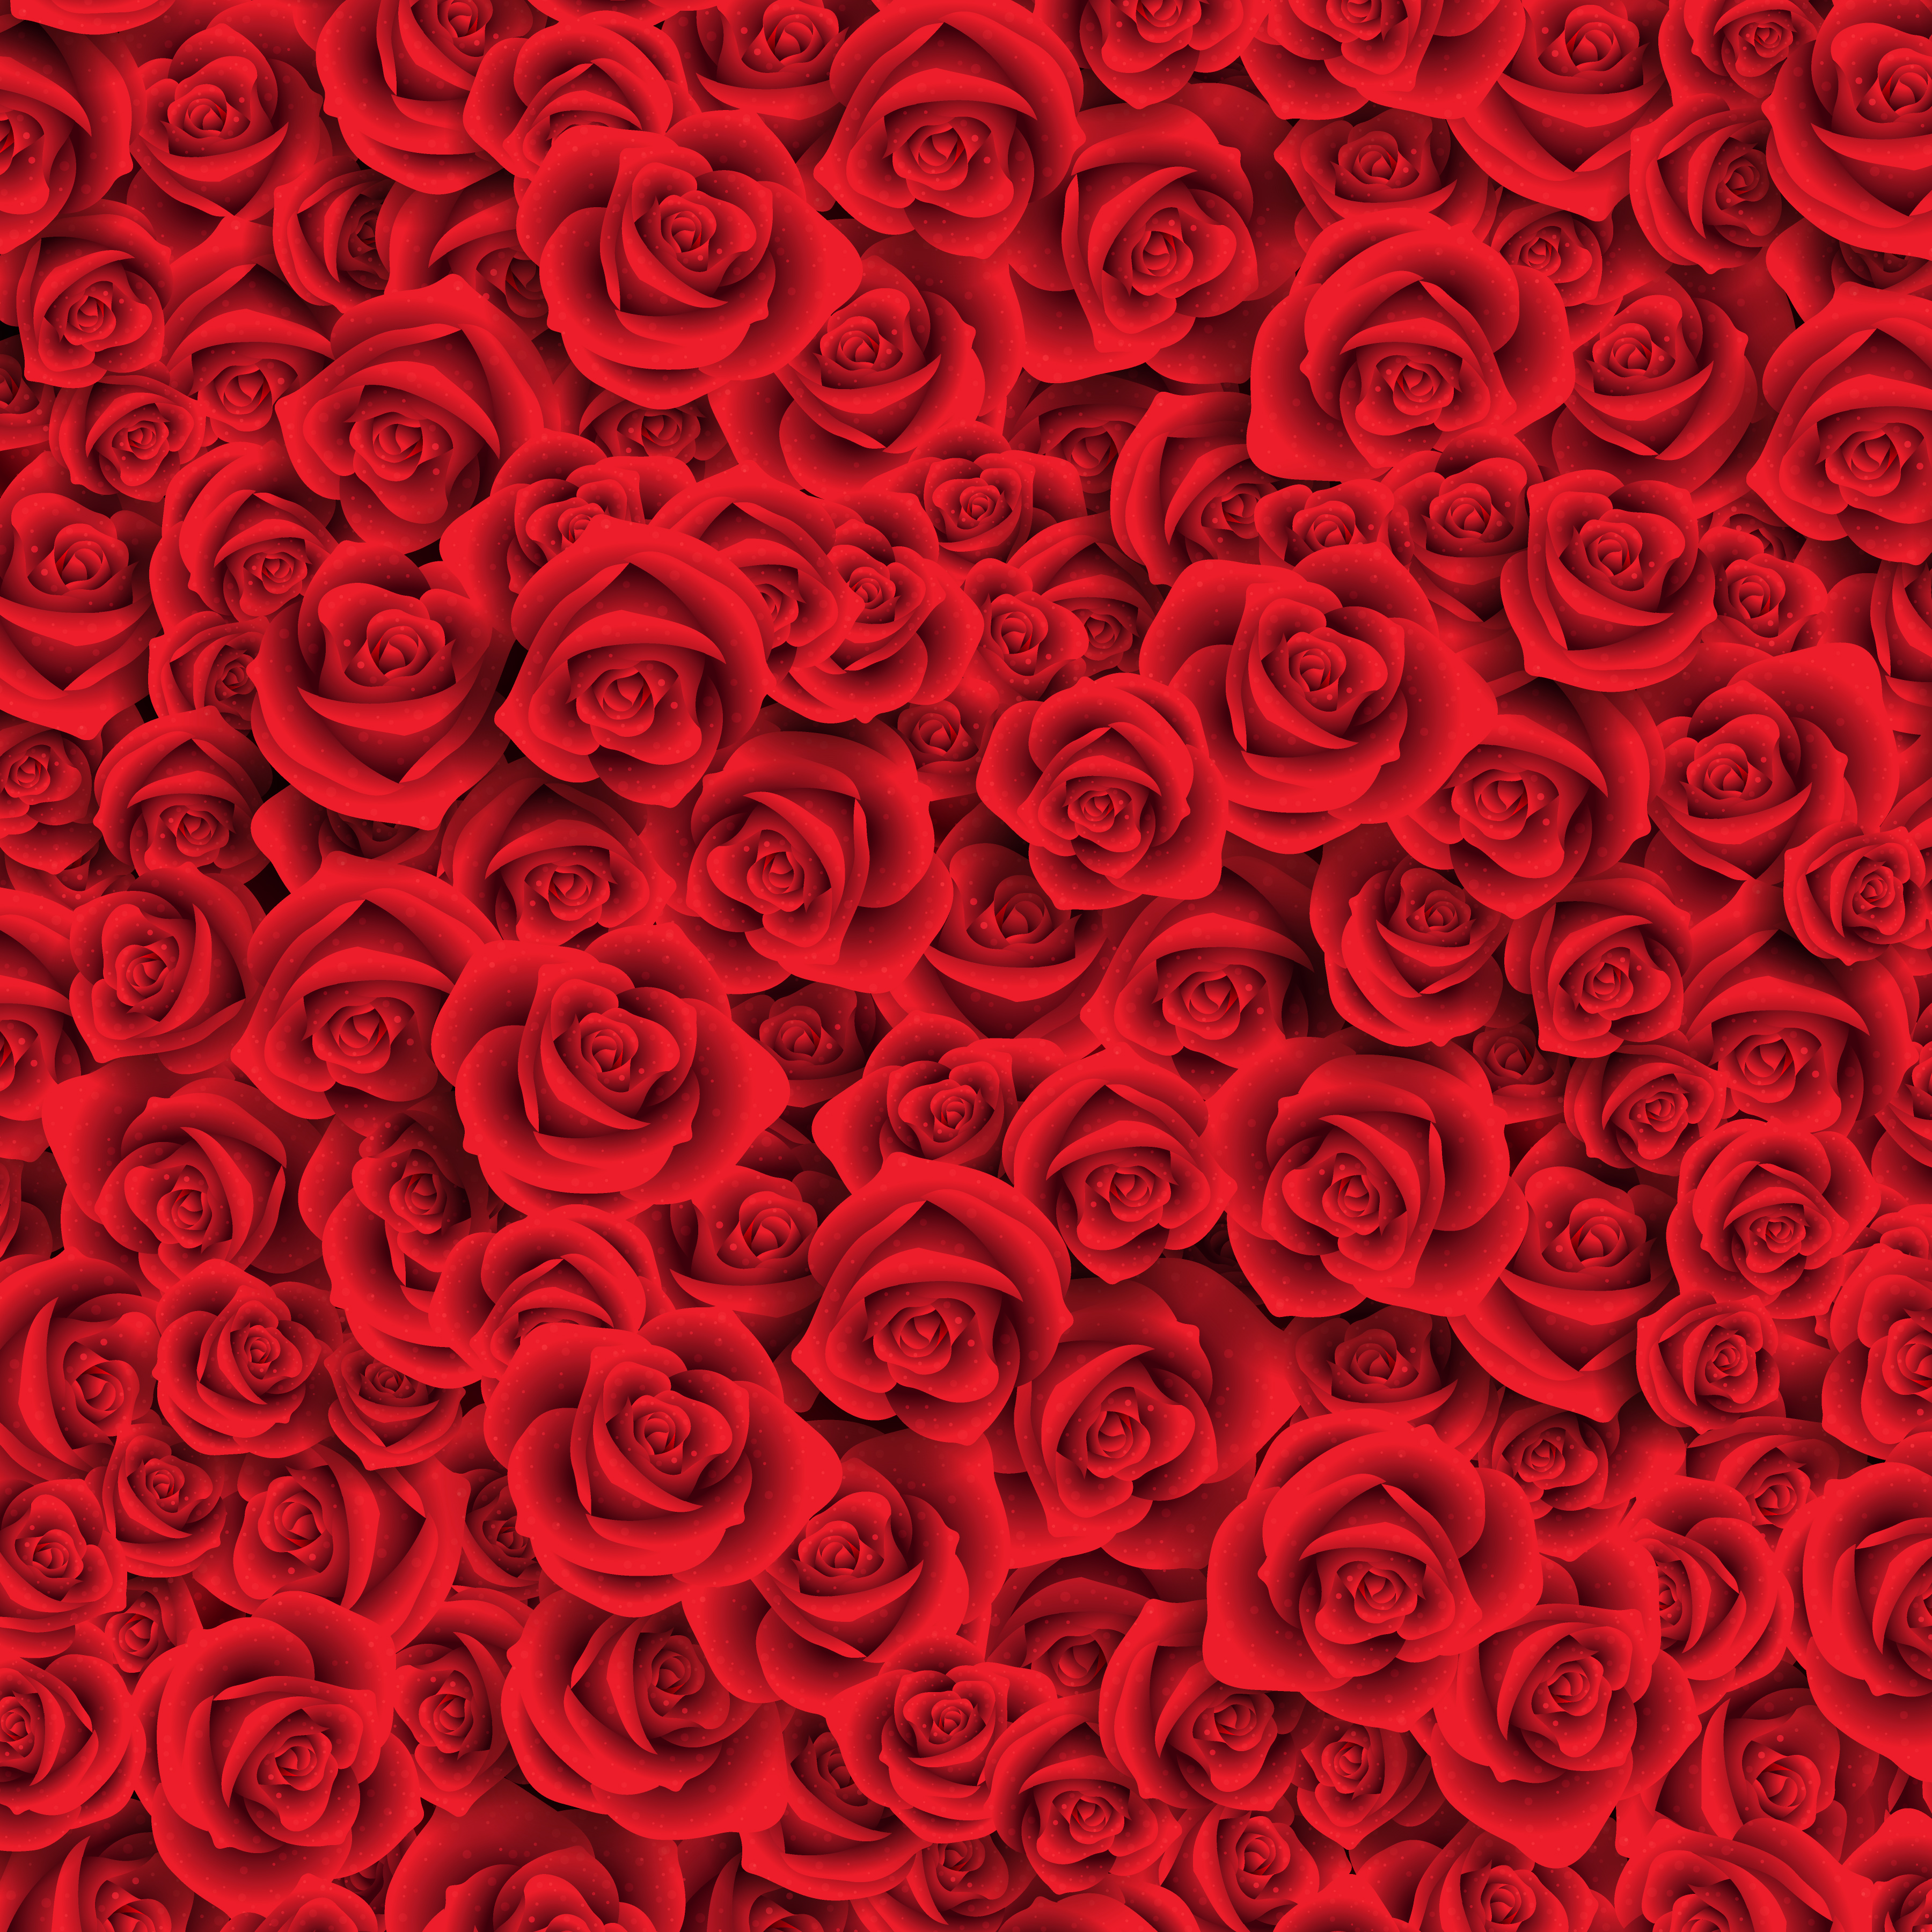 Rose Red Background Gallery Yopriceville   High Quality